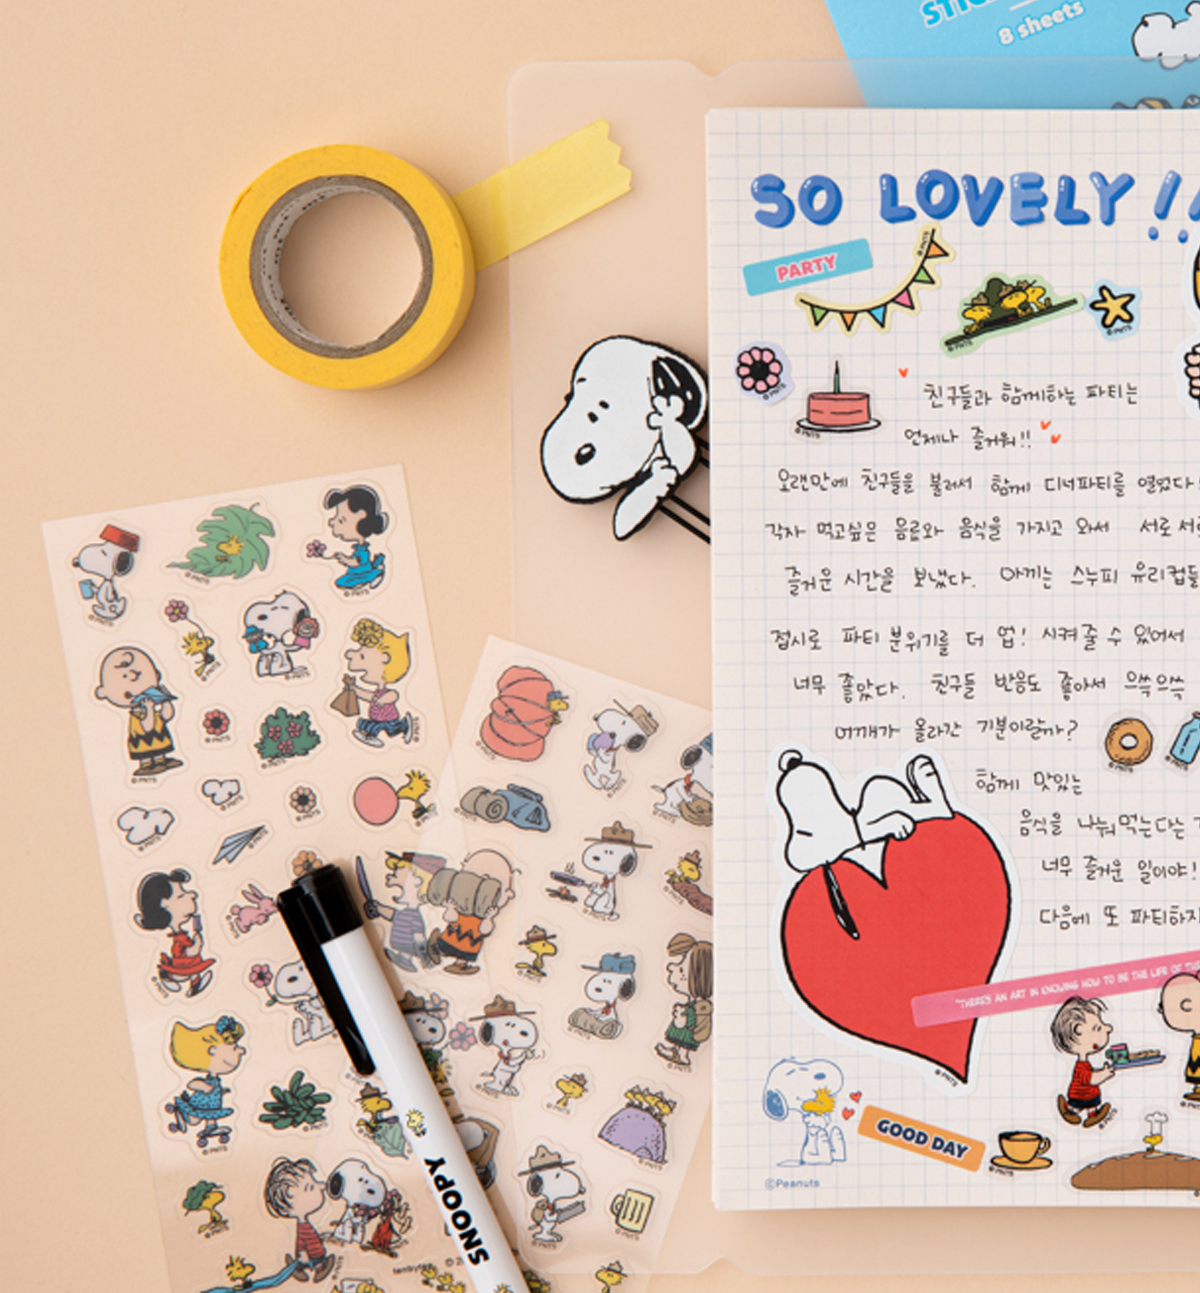 Snoopy Sticker Pack [8 Stickers]